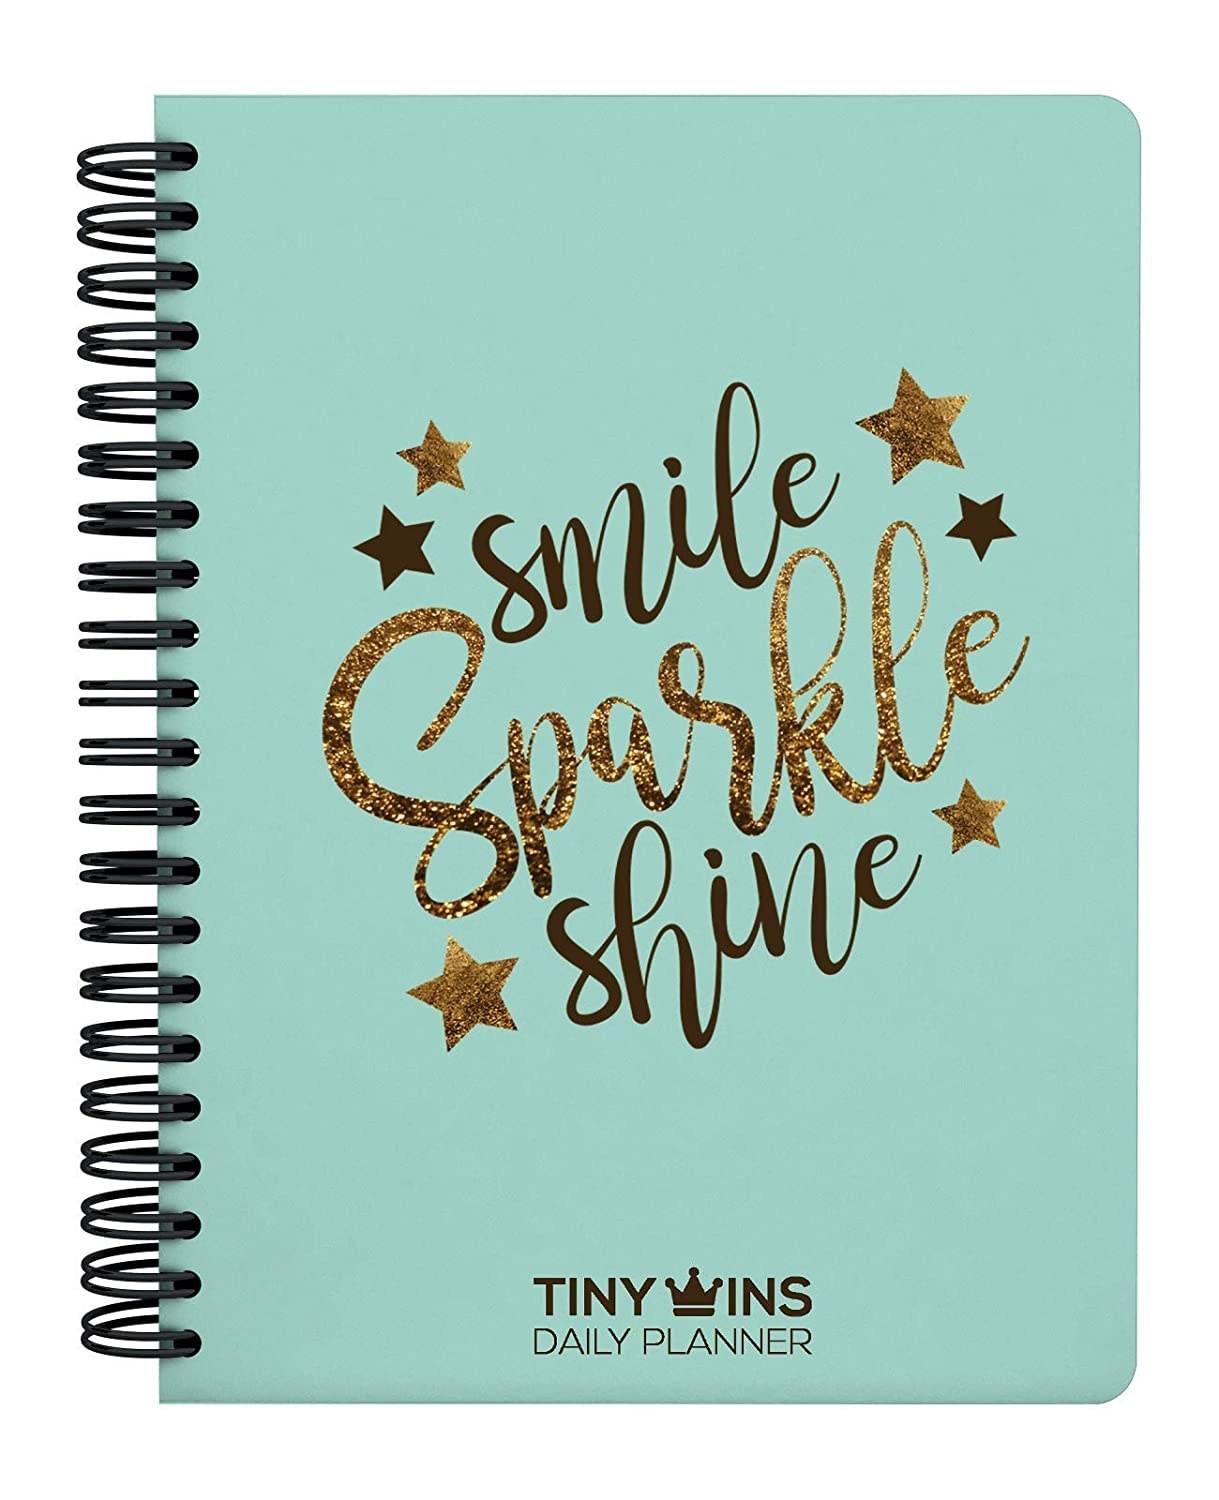 A spiral-bound journal with the words &#x27;Smile, sparkle, and shine&#x27; in matte and glittery text